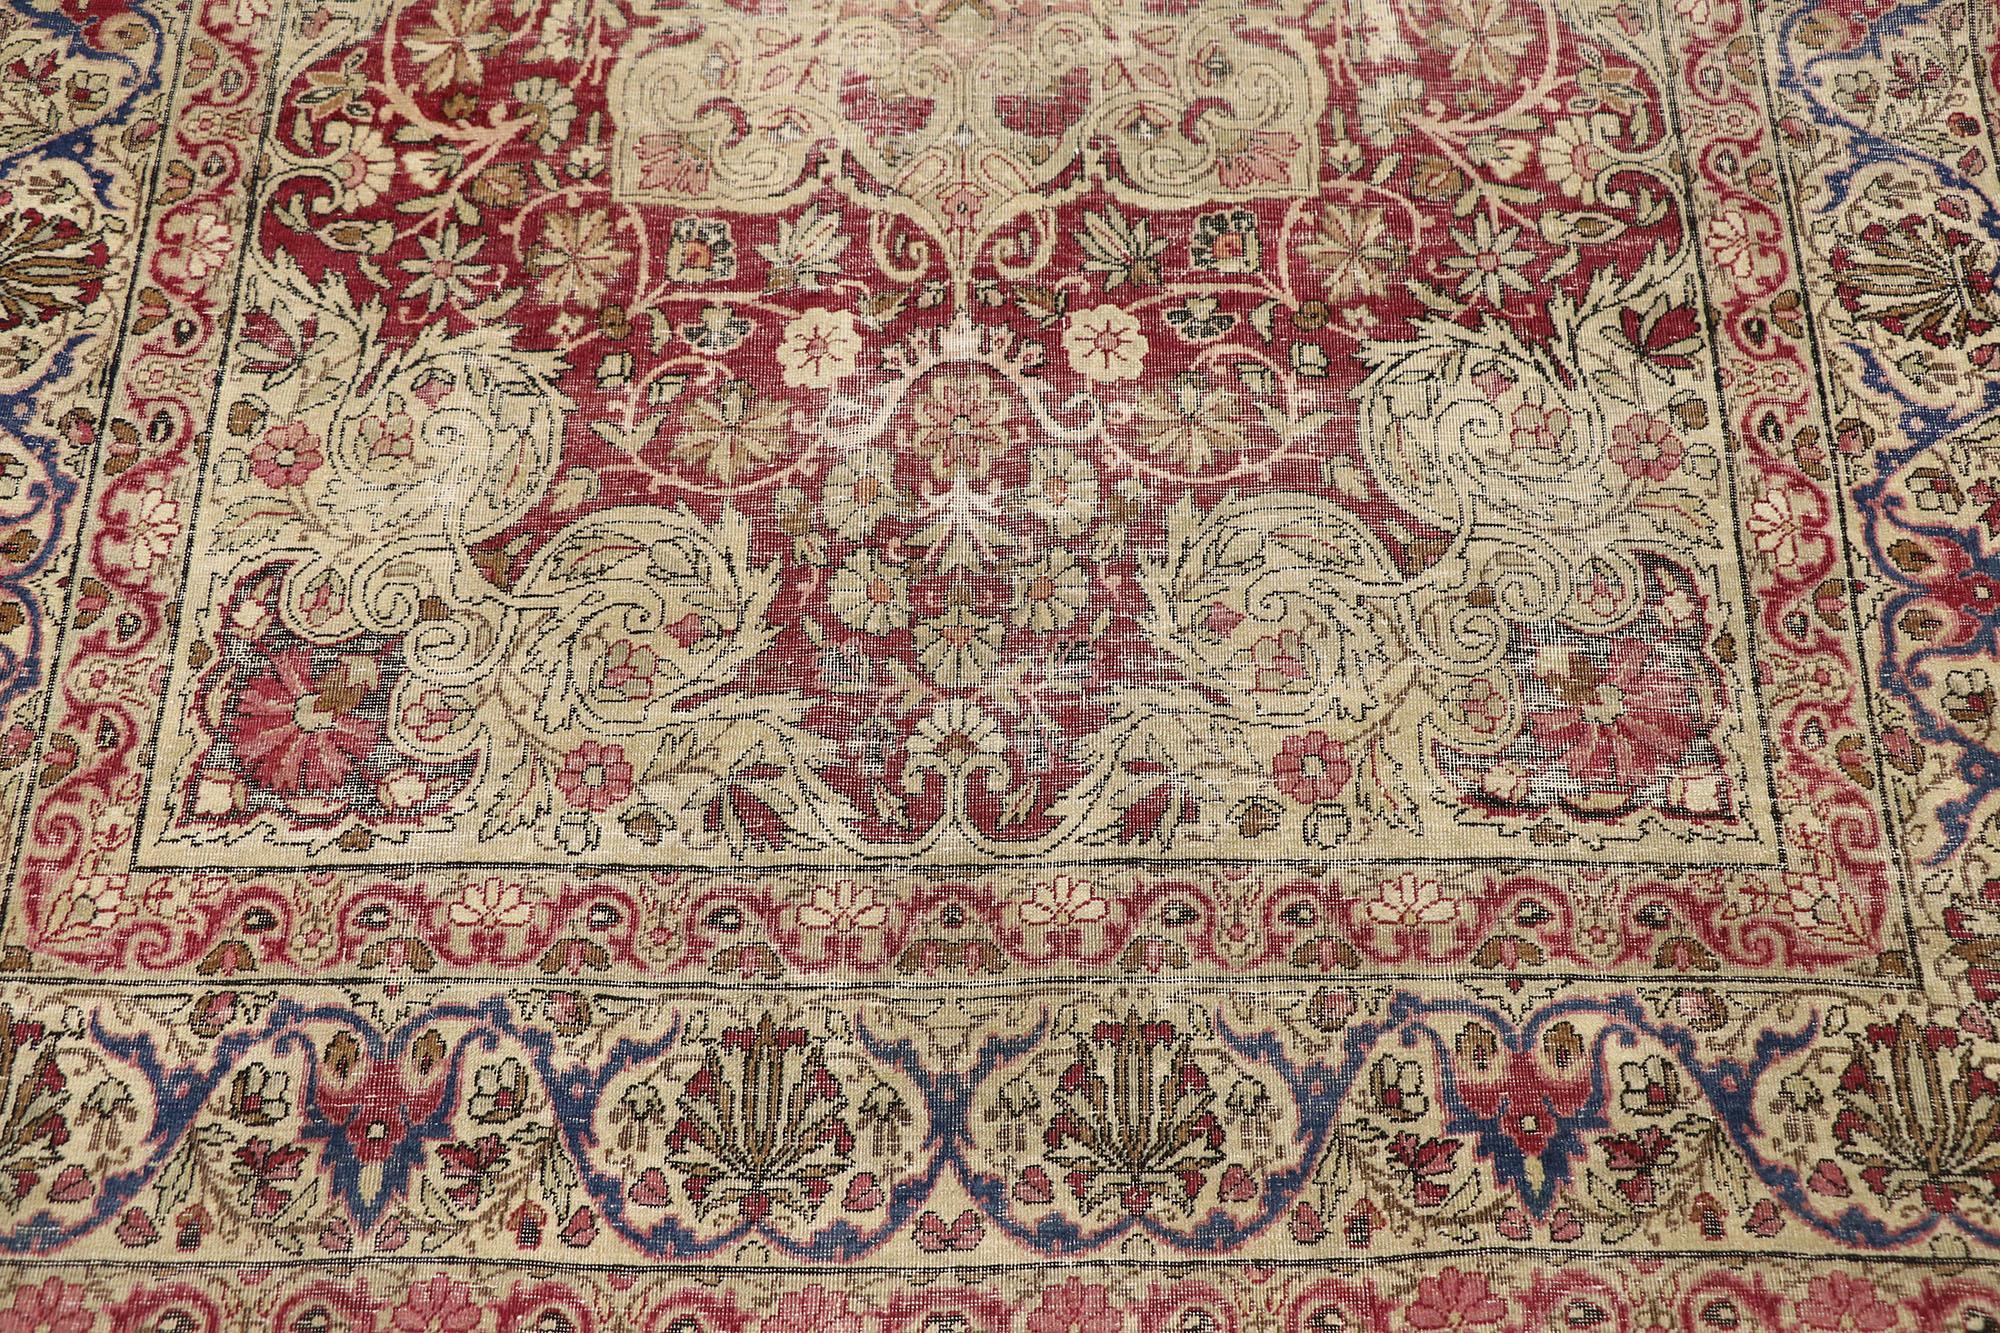 Hand-Knotted Distressed Antique Persian Kerman Rug with Rustic Old World Victorian Style For Sale